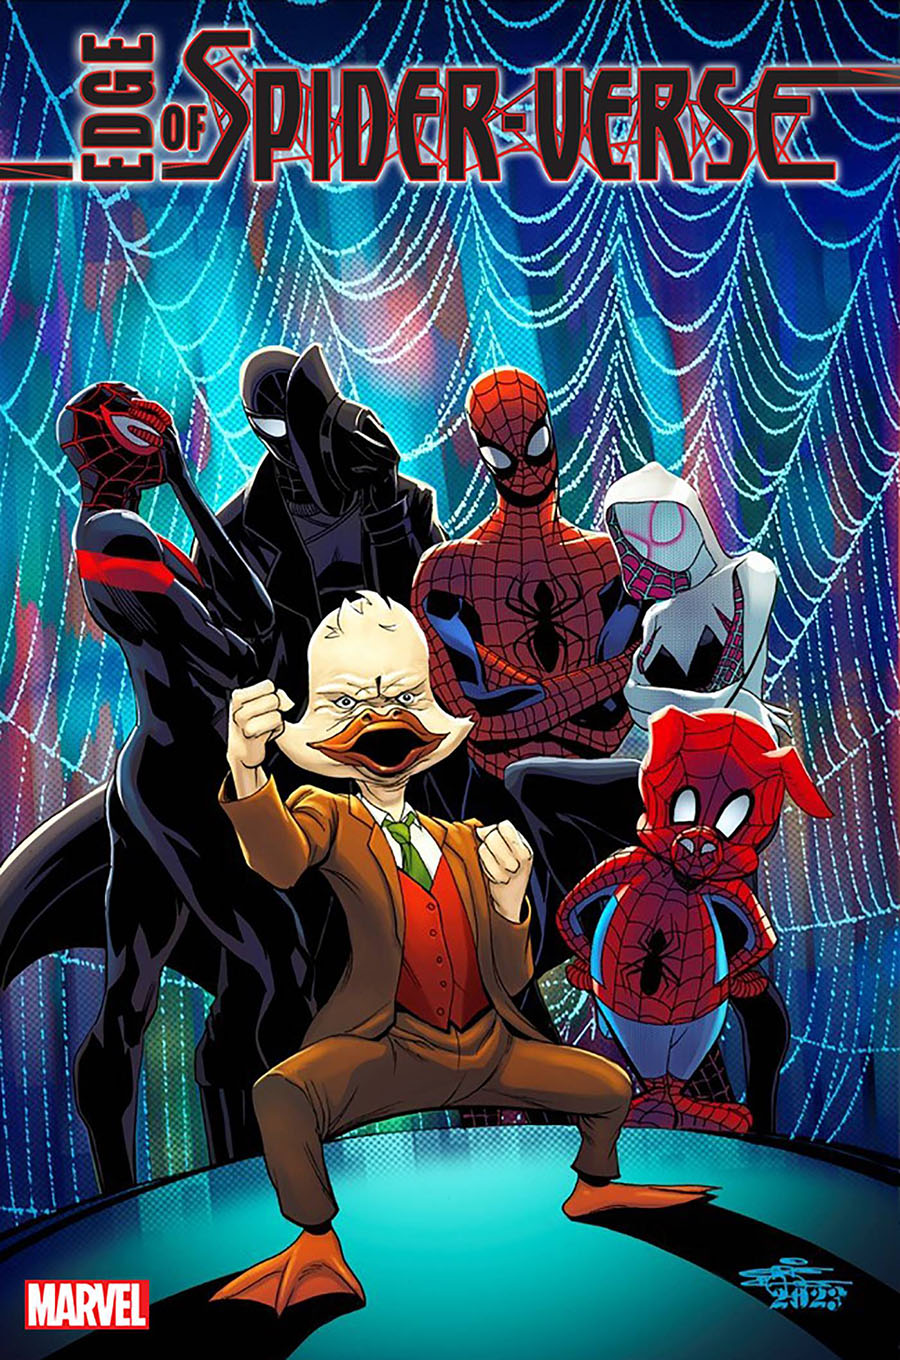 Edge Of Spider-Verse Vol 3 #1 Cover C Variant ChrisCross Howard The Duck Cover (Limit 1 Per Customer)